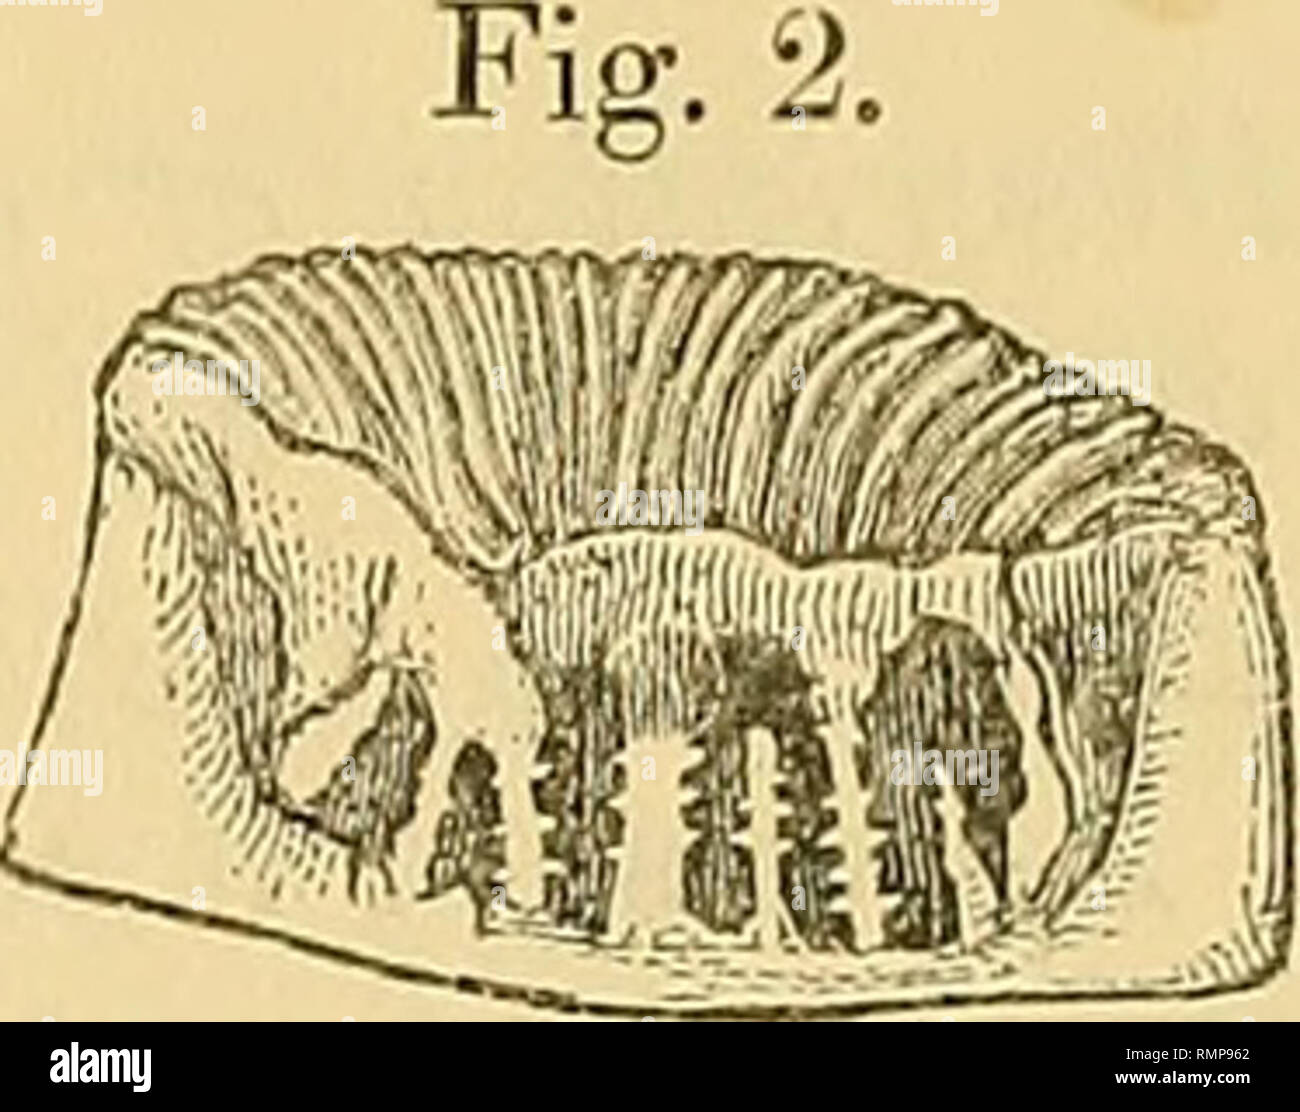 . The Annals and magazine of natural history; zoology, botany, and geology. . Fig. 1. Platygyra ascensionis. A few calicles, as seen from above, X 4. Fig. 2. Ditto. A wide calicle in vertical section, made outside the columella, wliicli is seen beyond line of section, x 4. (under the appellation Coeloria) by Milne-Edwards &amp; Haime (Hist. Cor. ii. p. 411) ; but Dr. Briiggemann has given reasons (&quot; Corals of Rodriguez,&quot; Phil. Trans, vol. clxviii. p. 571) for considering the character, whether vertical or spongy, of this part not to be even of specific importance, having been obliged Stock Photo